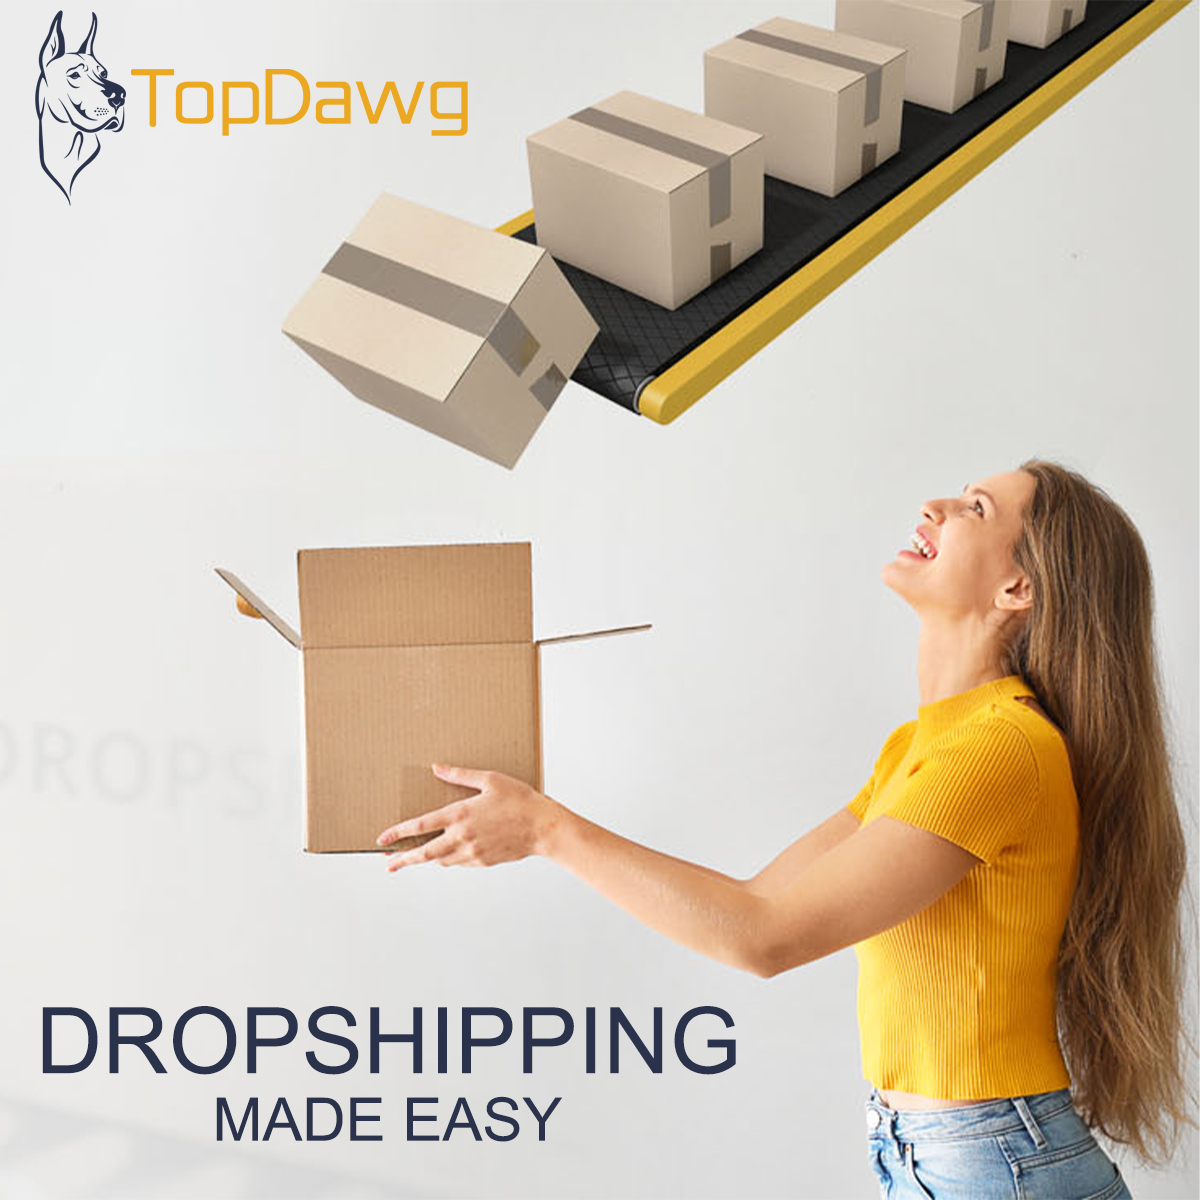 TopDawg Announces New Website Launch with Expanded Features